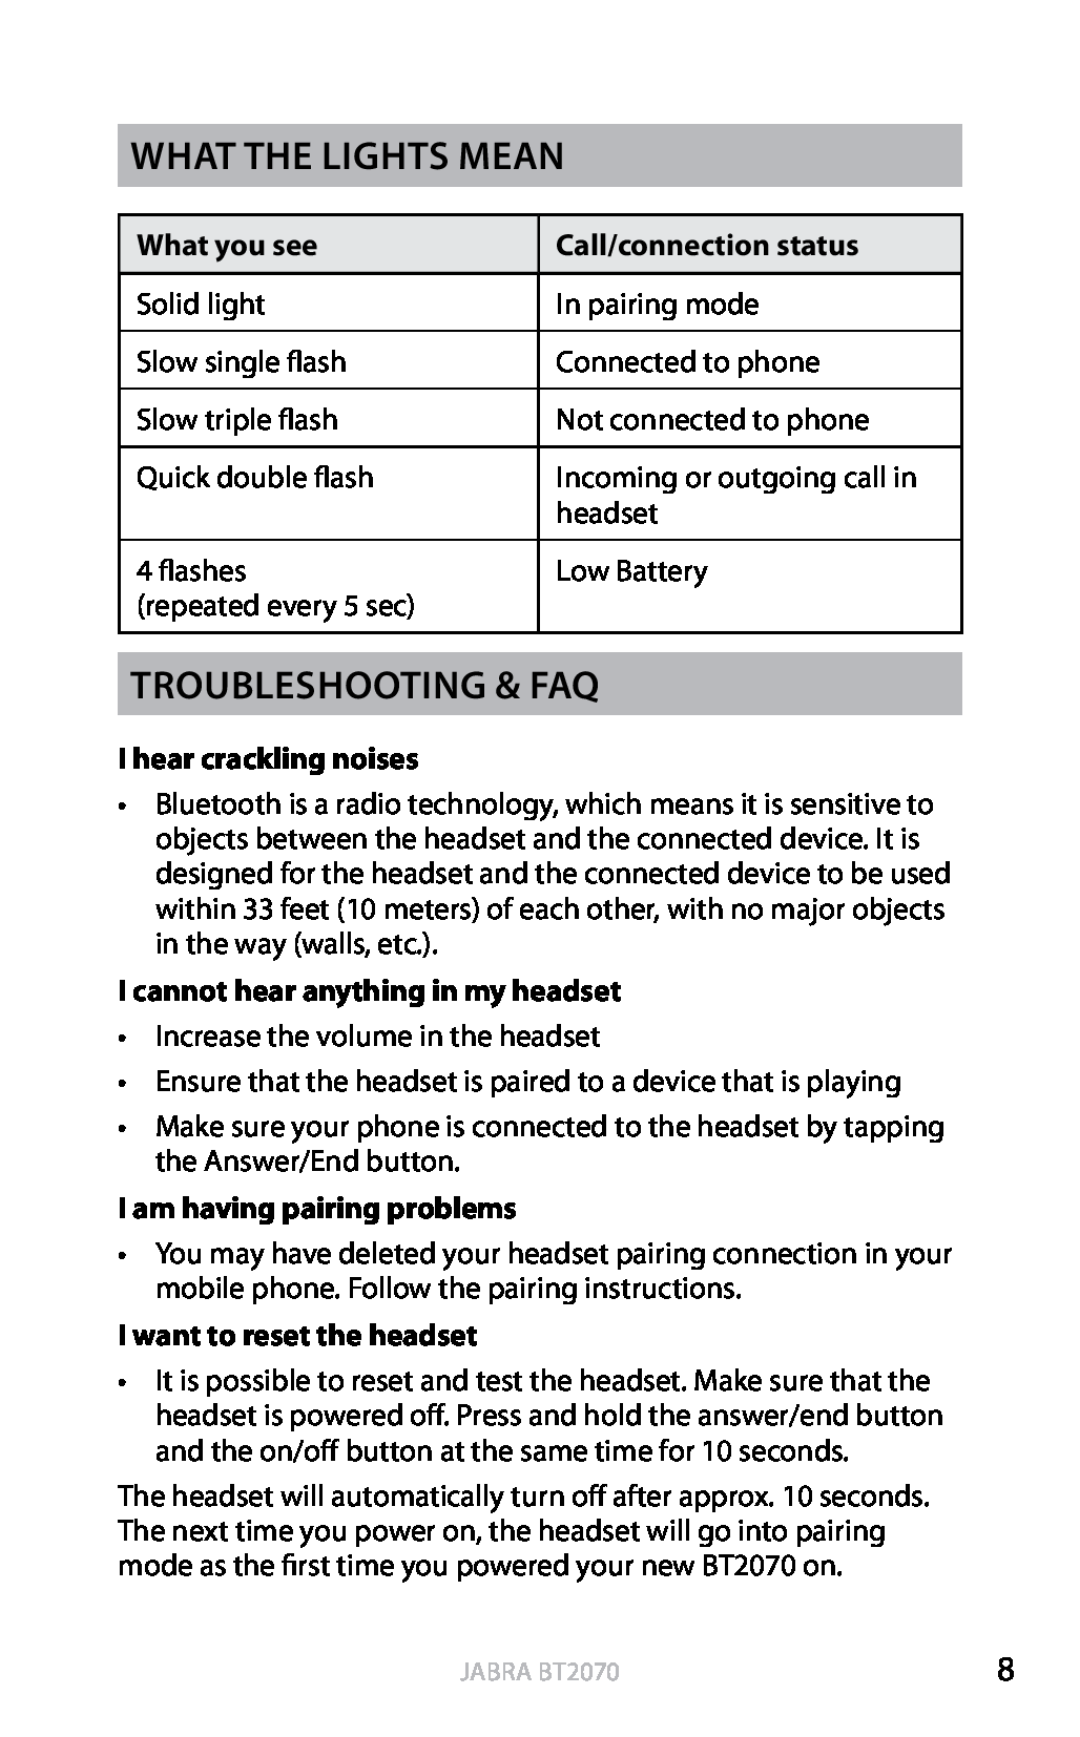 Jabra BT2070 What the lights mean, Troubleshooting & FAQ, Call/connection status, I hear crackling noises, english 